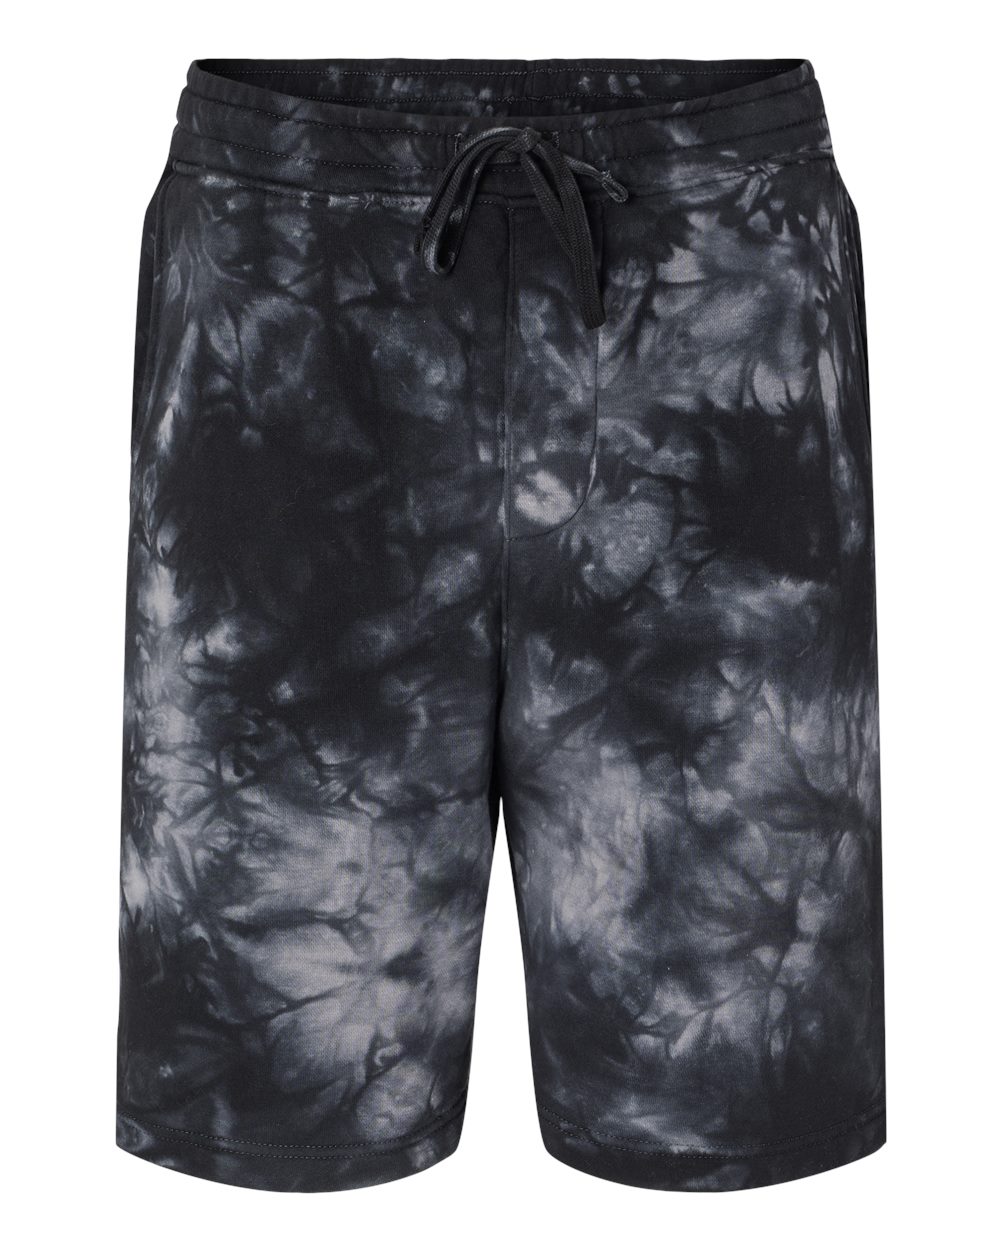 Tie-Dye Fleece Shorts-Independent Trading Co.